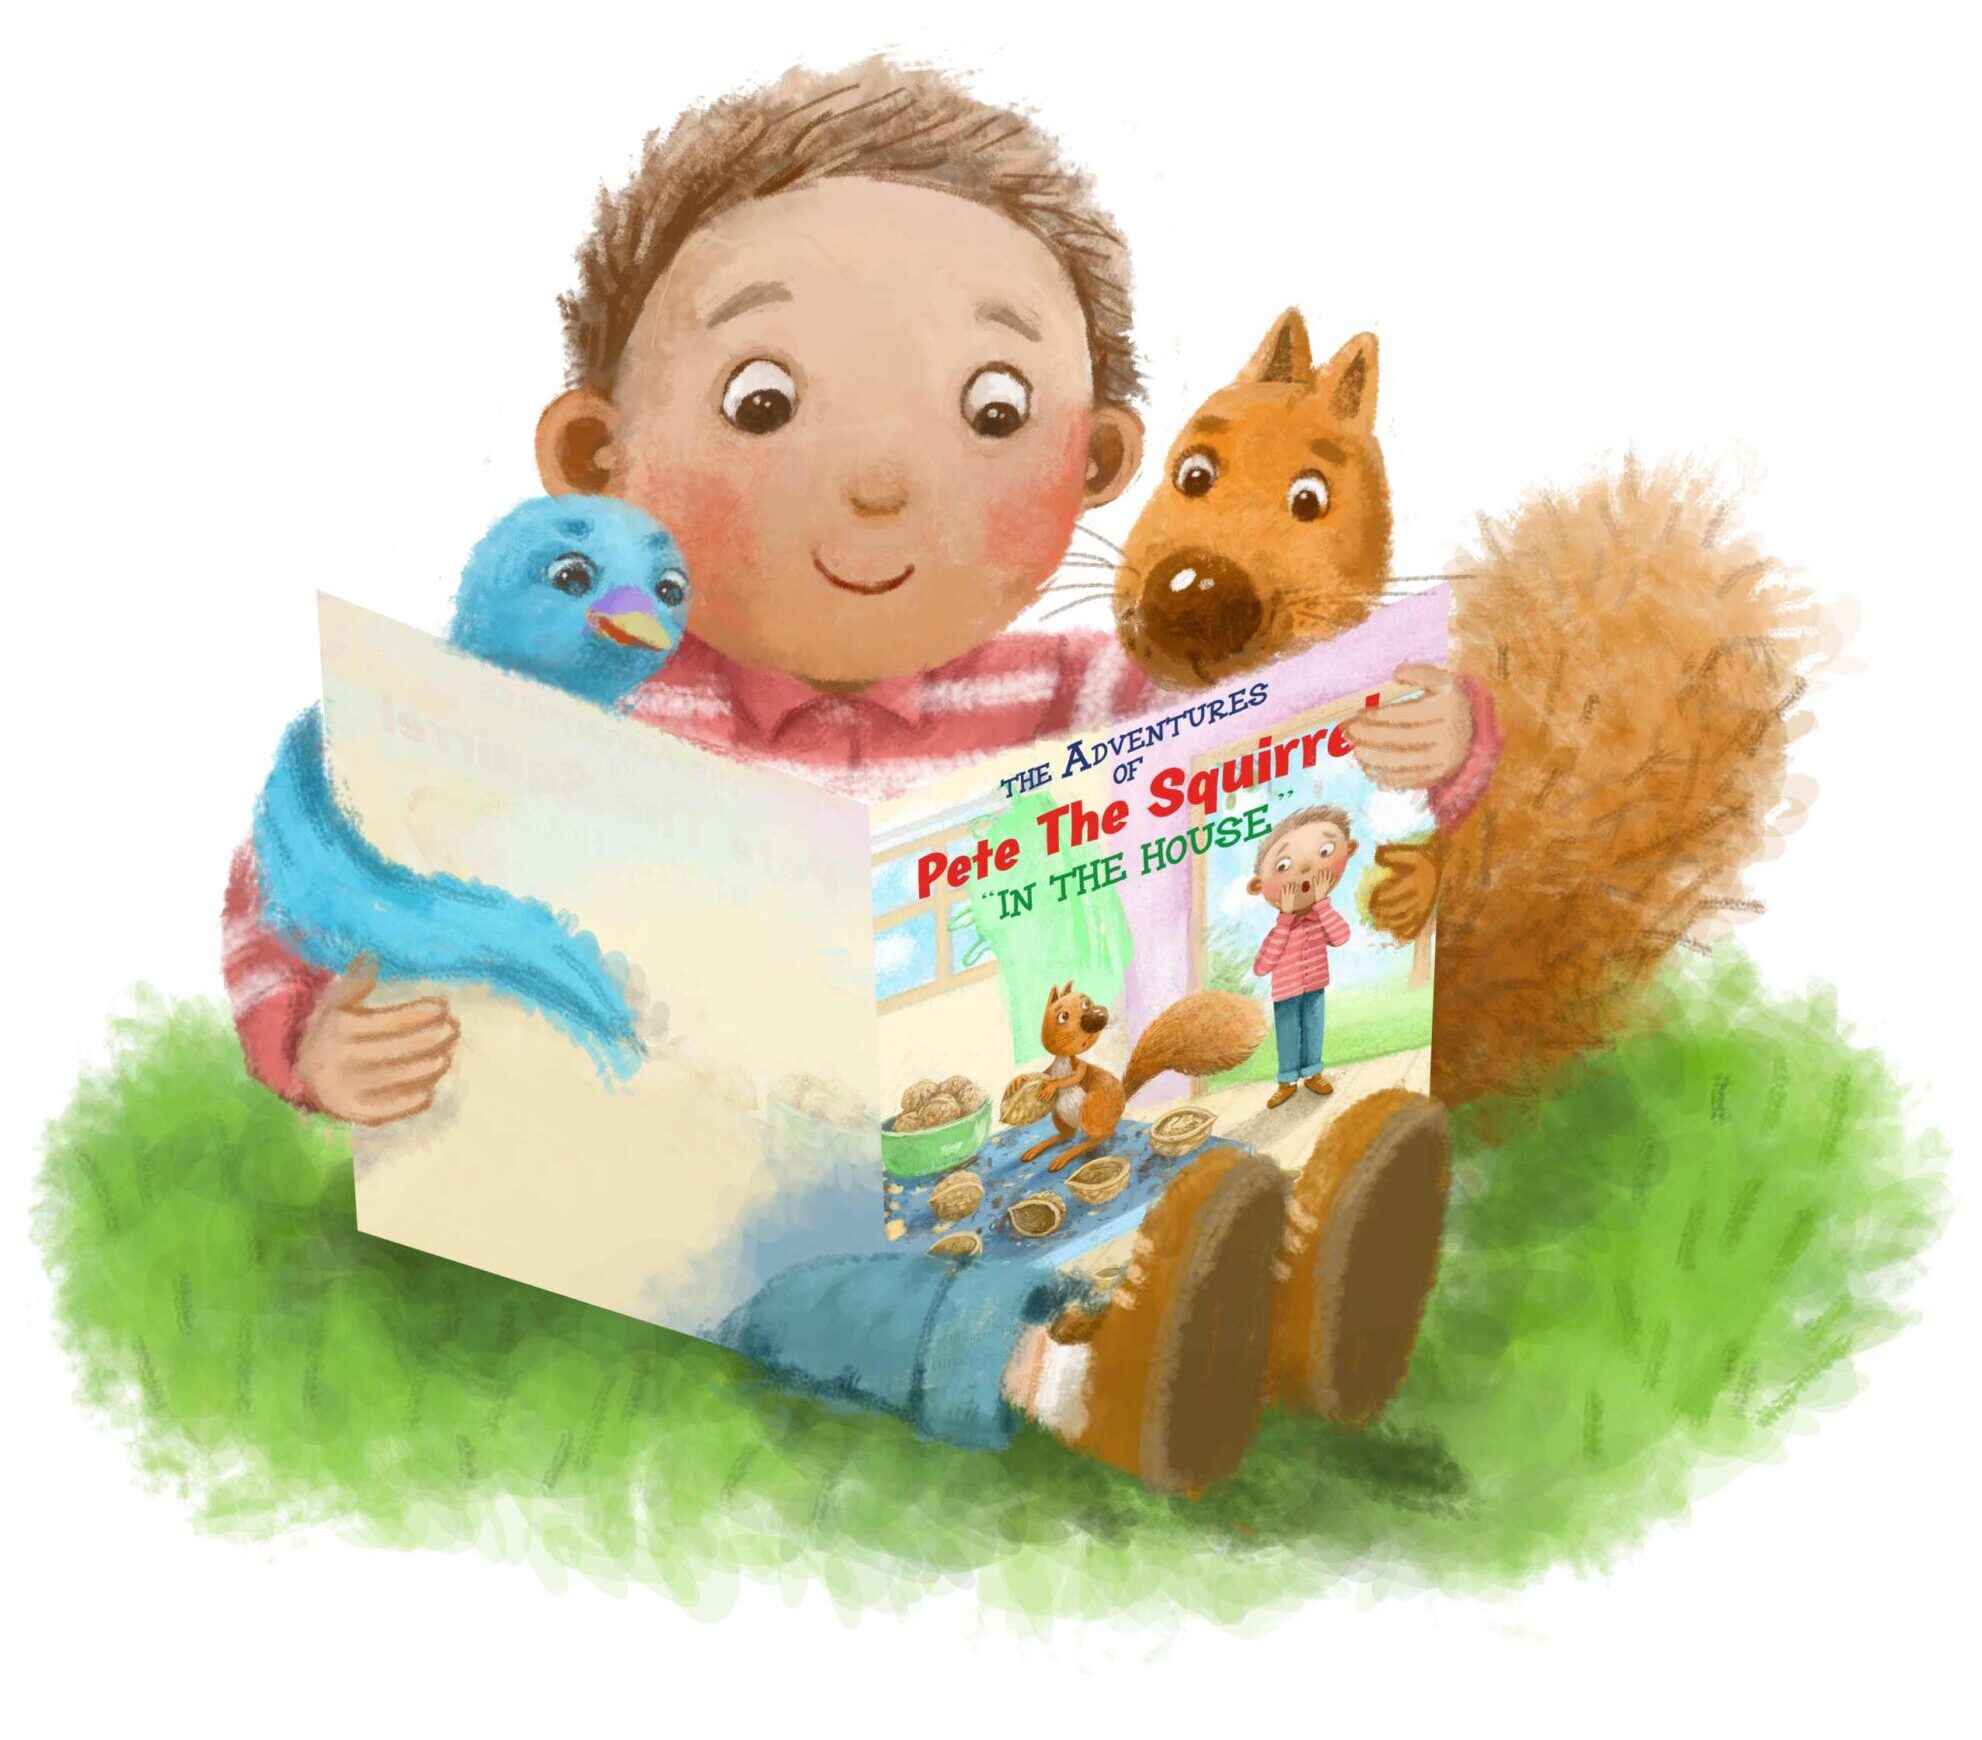 Pete The Squirrel with friends Andy and Betty Blue Jay reading THE ADVENTURES OF PETE THE SQUIRREL